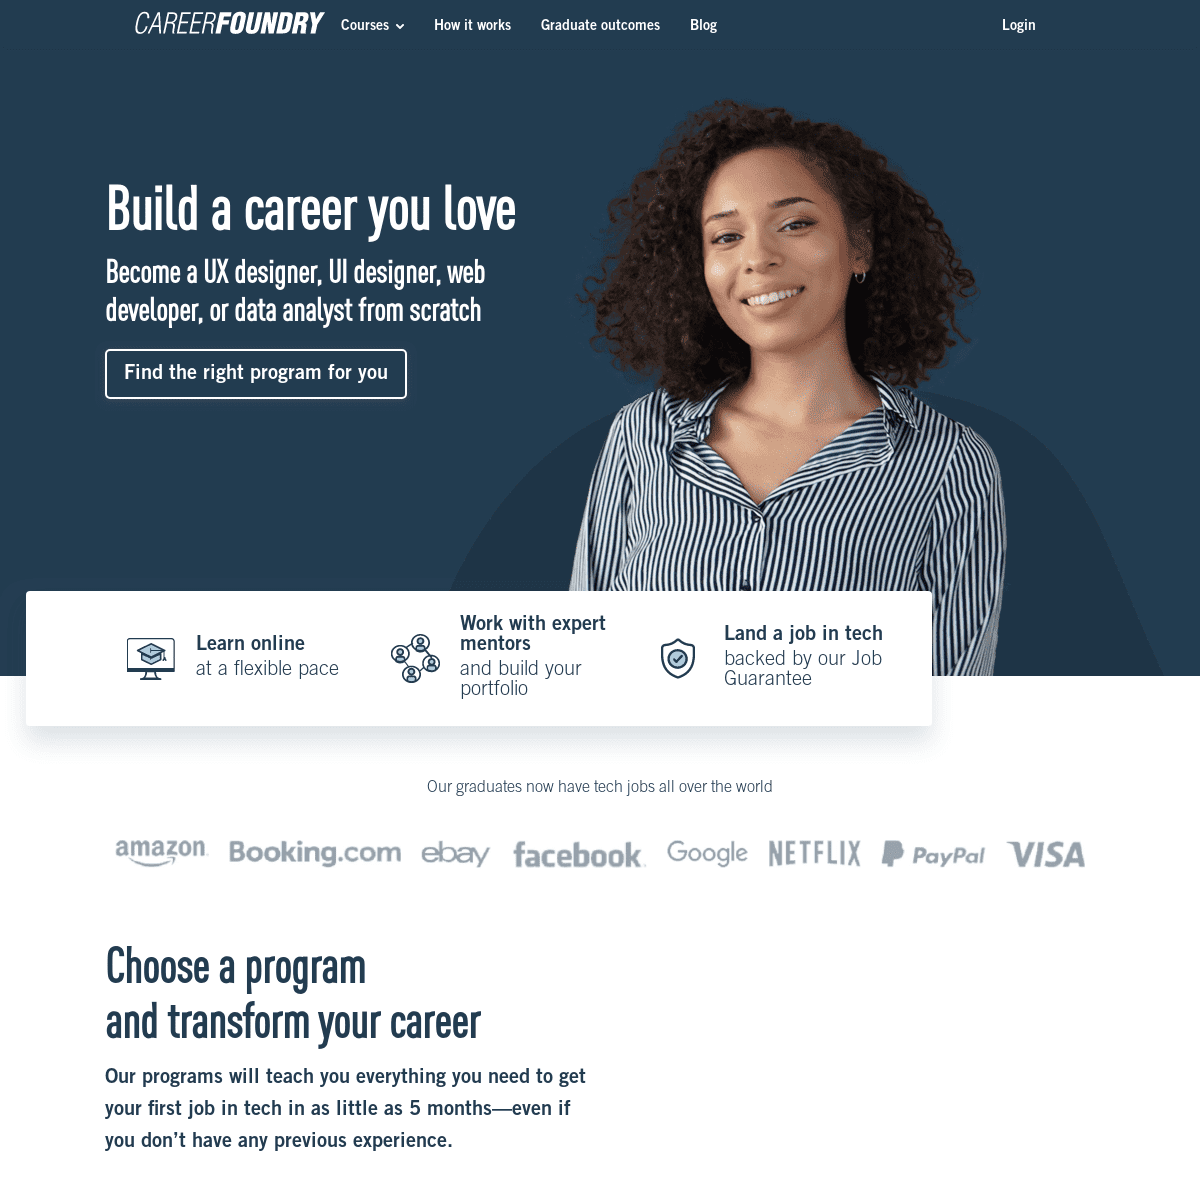 A complete backup of careerfoundry.com